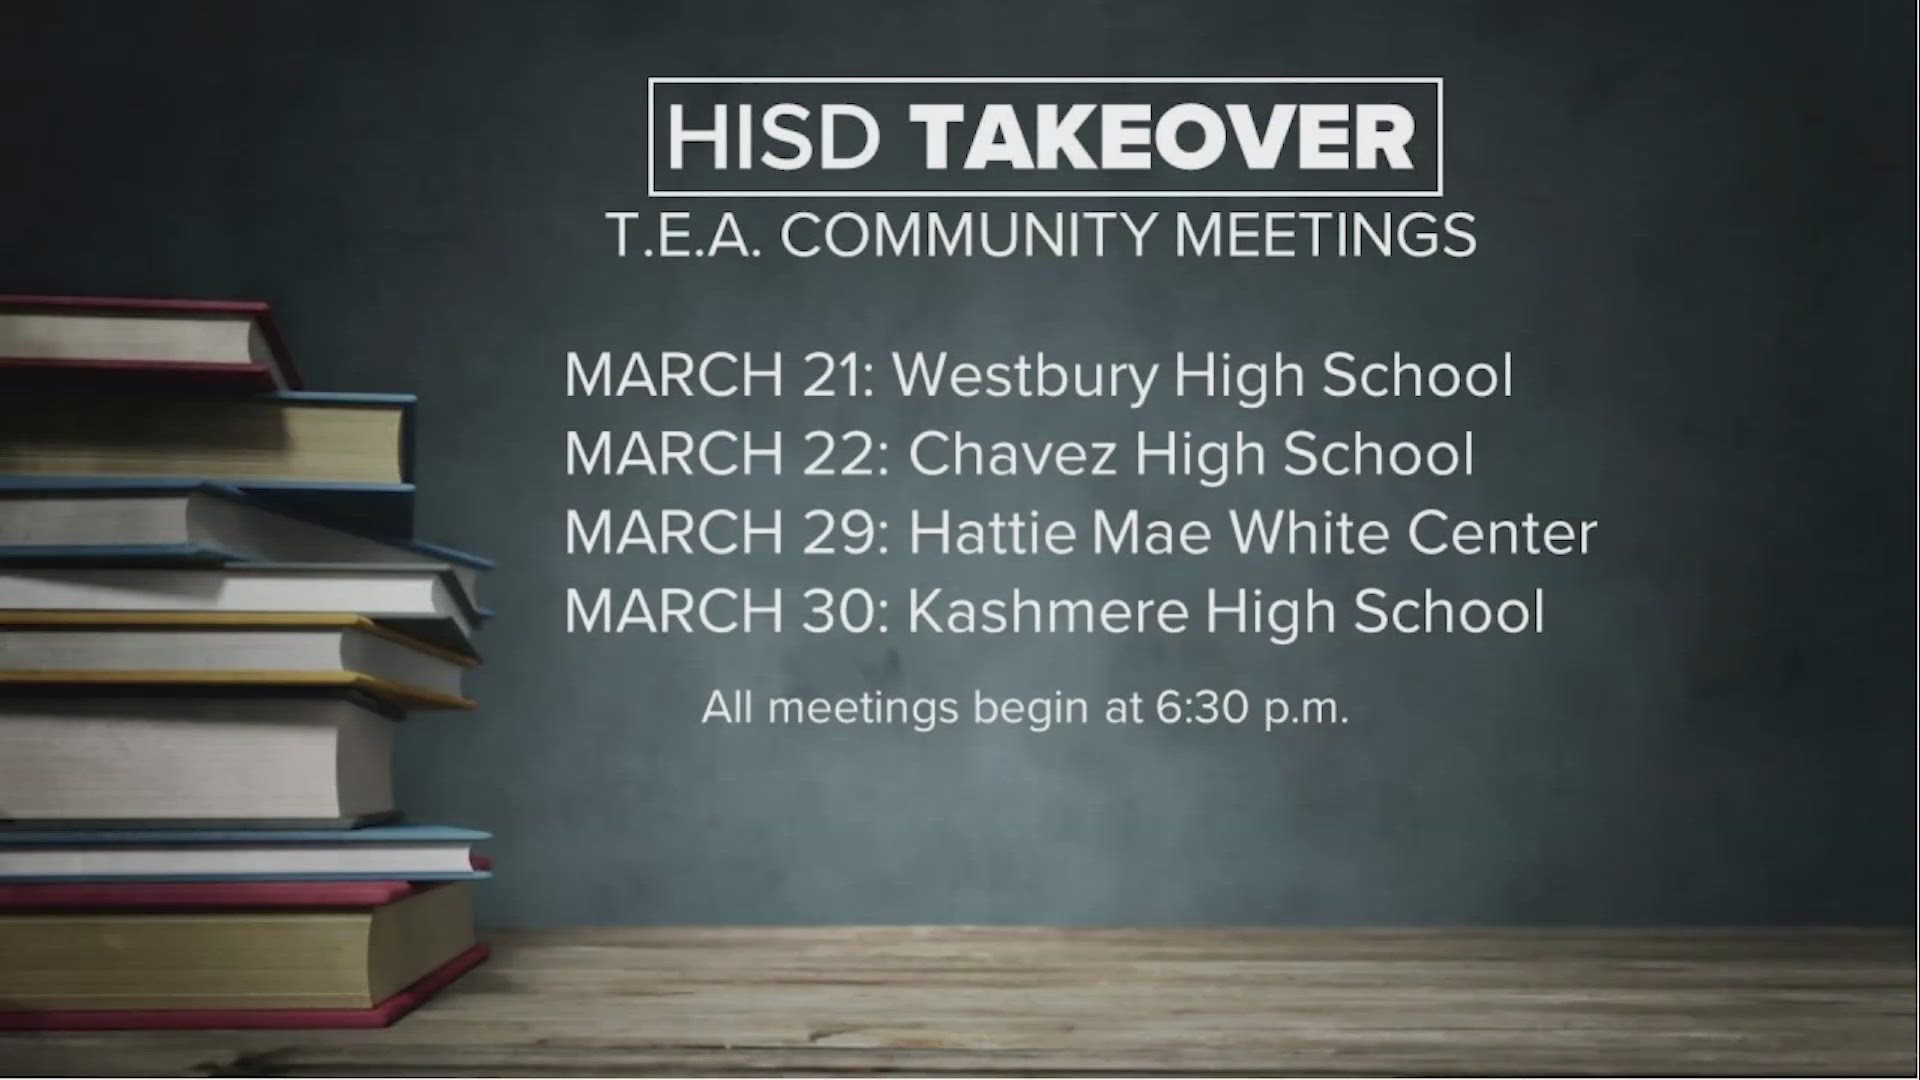 On Tuesday, the Texas Education Agency will be hosting its first community meeting after announcing its takeover of Houston ISD.